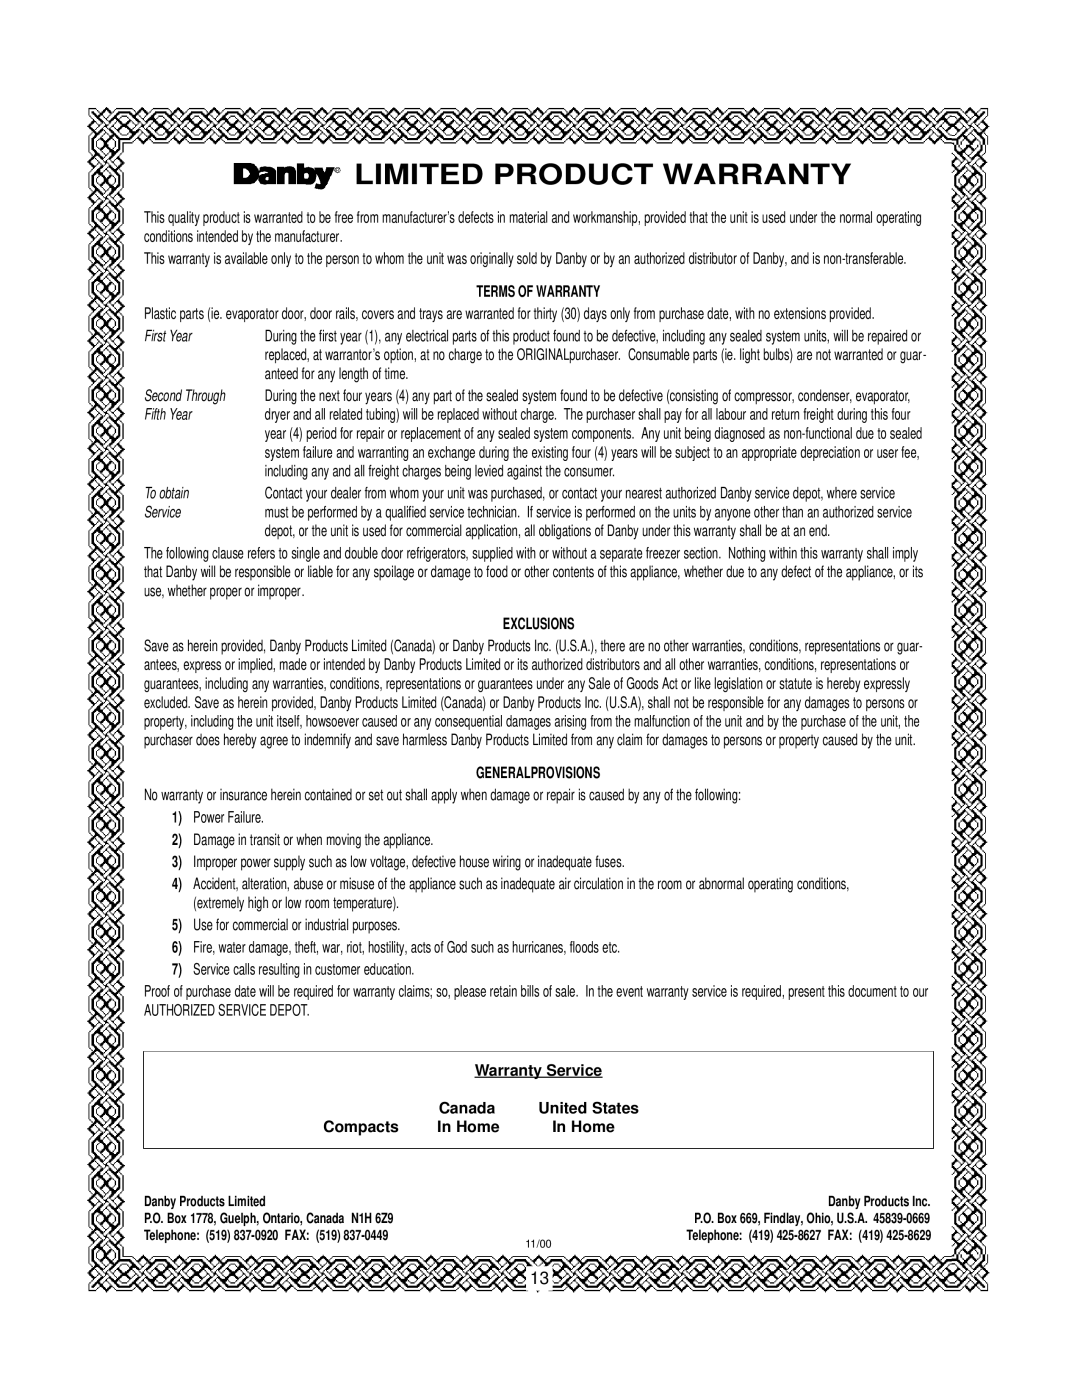 Danby DKC445BL manual Limited Product Warranty, Terms Of Warranty, Exclusions, Generalprovisions, Warranty Service, Canada 